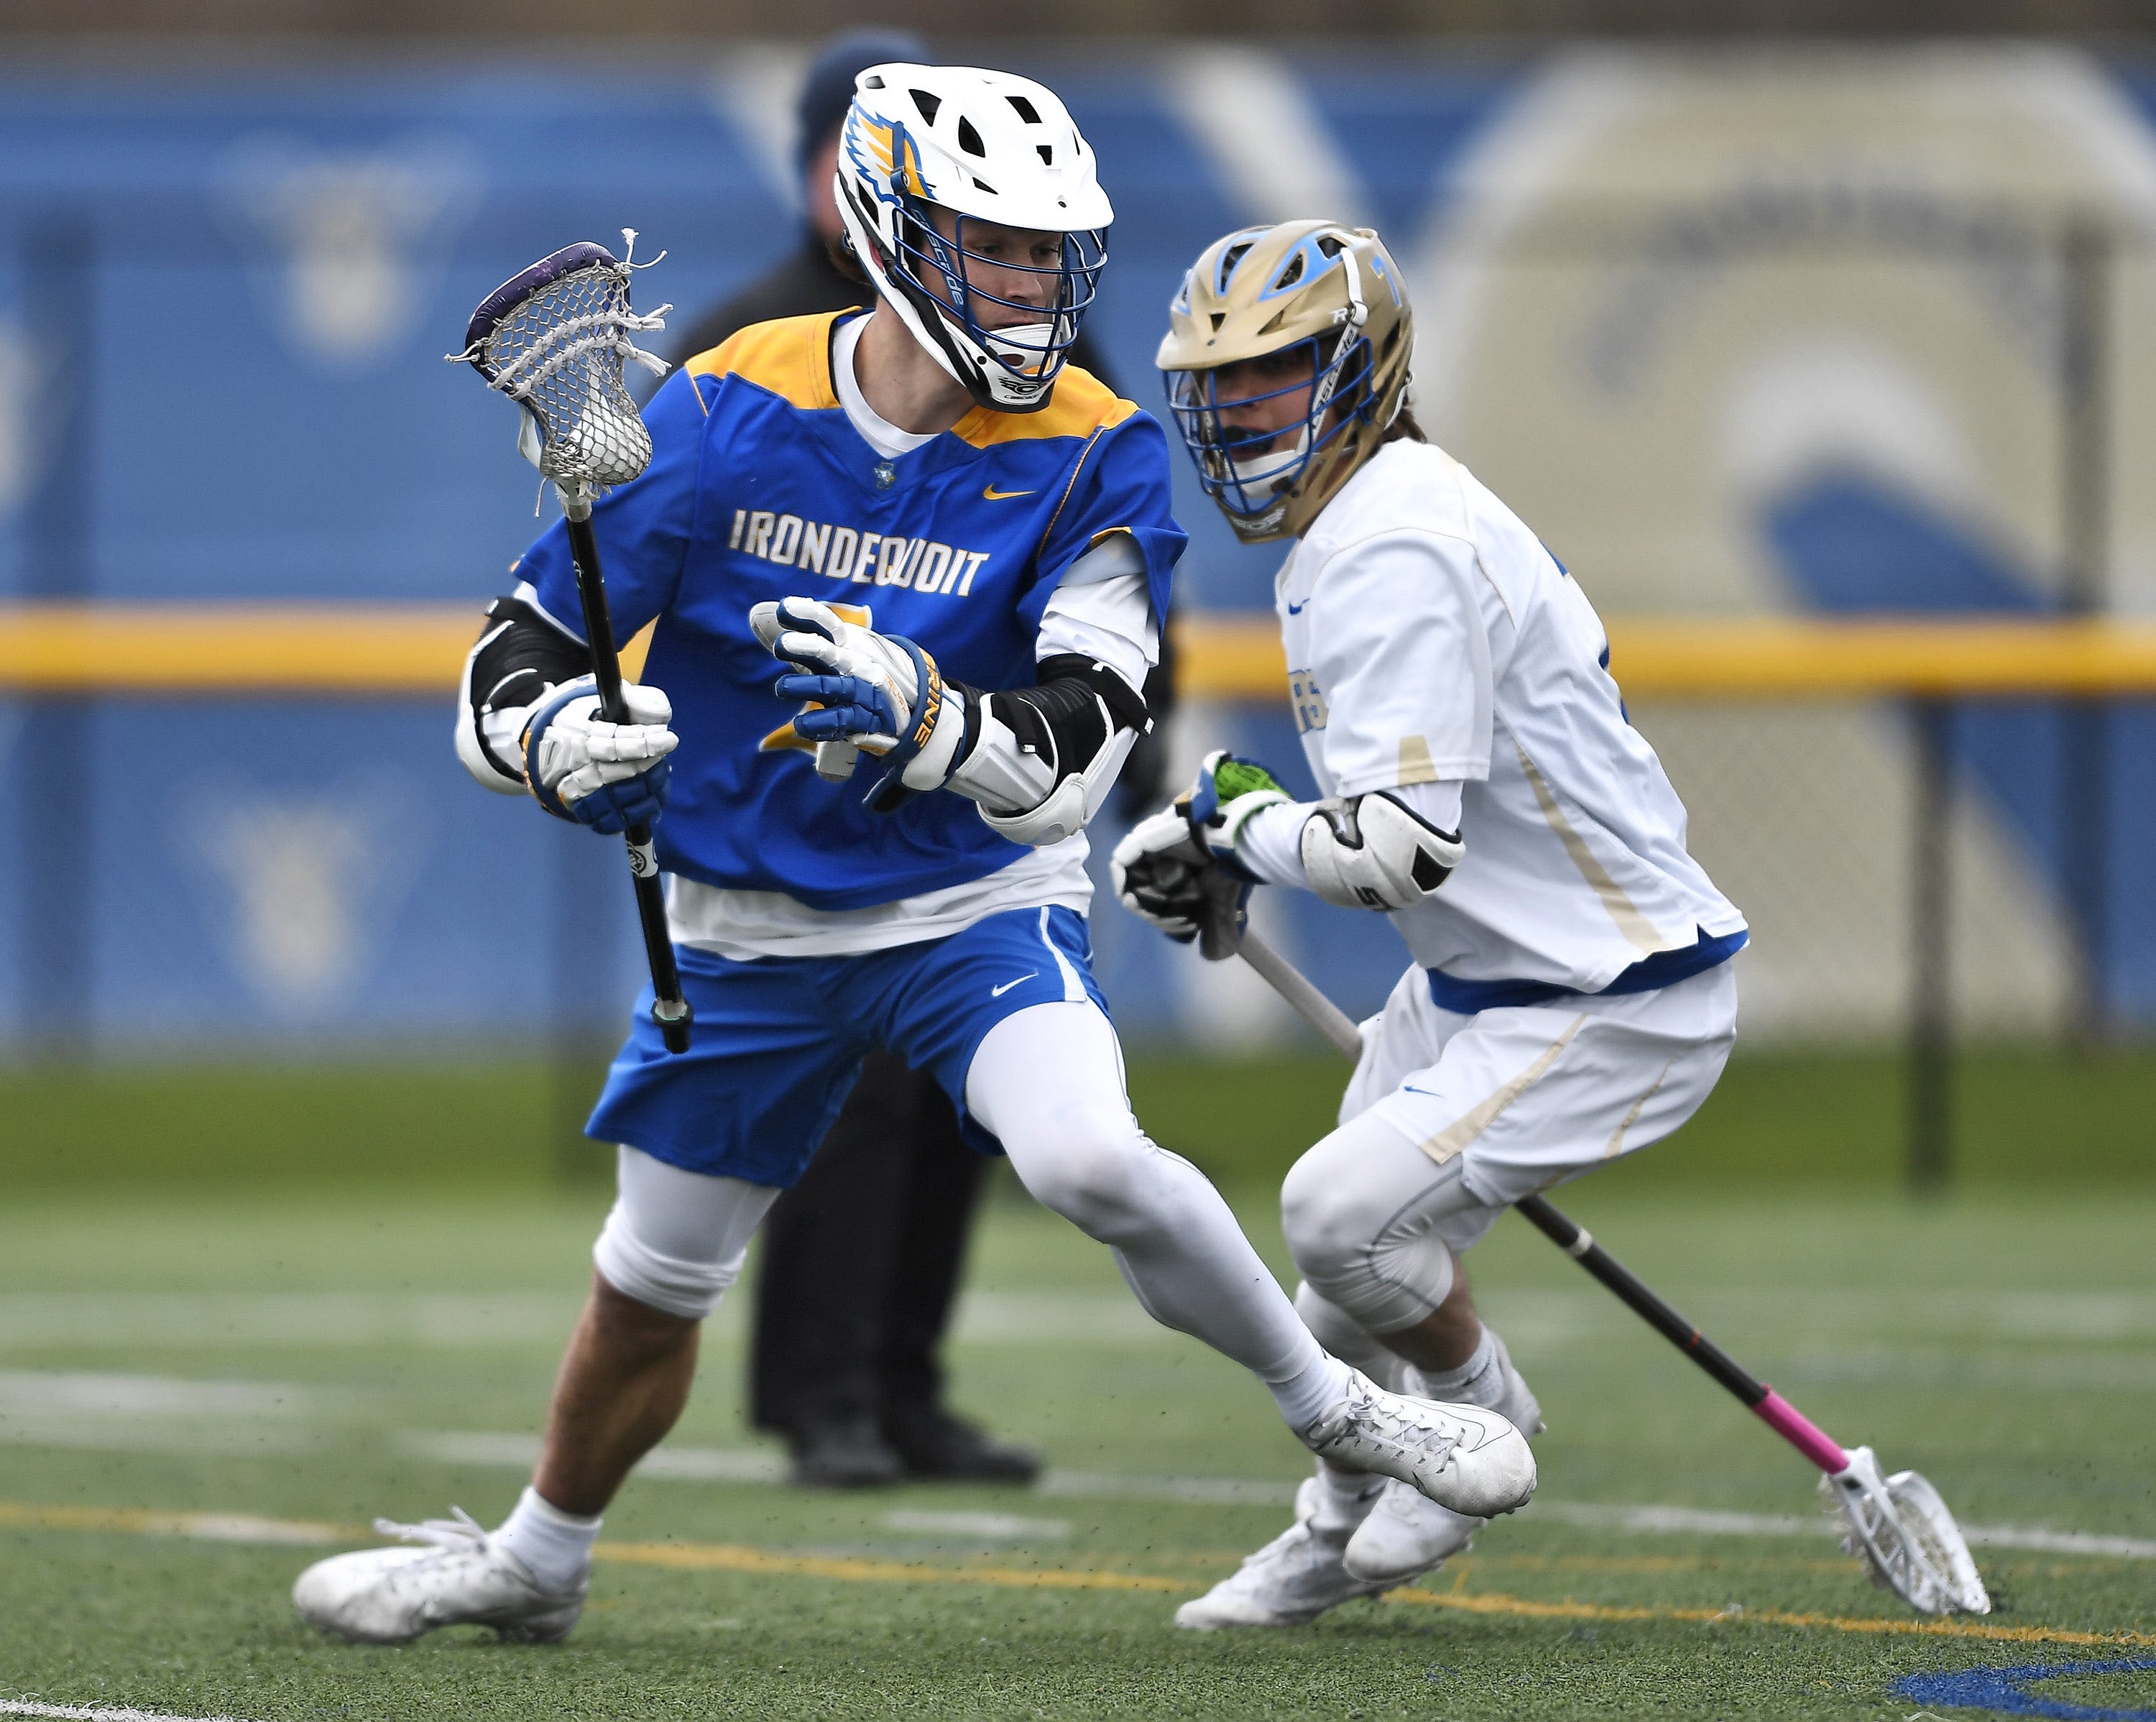 14 Section V alumni are competing for Division I lacrosse national titles: The list